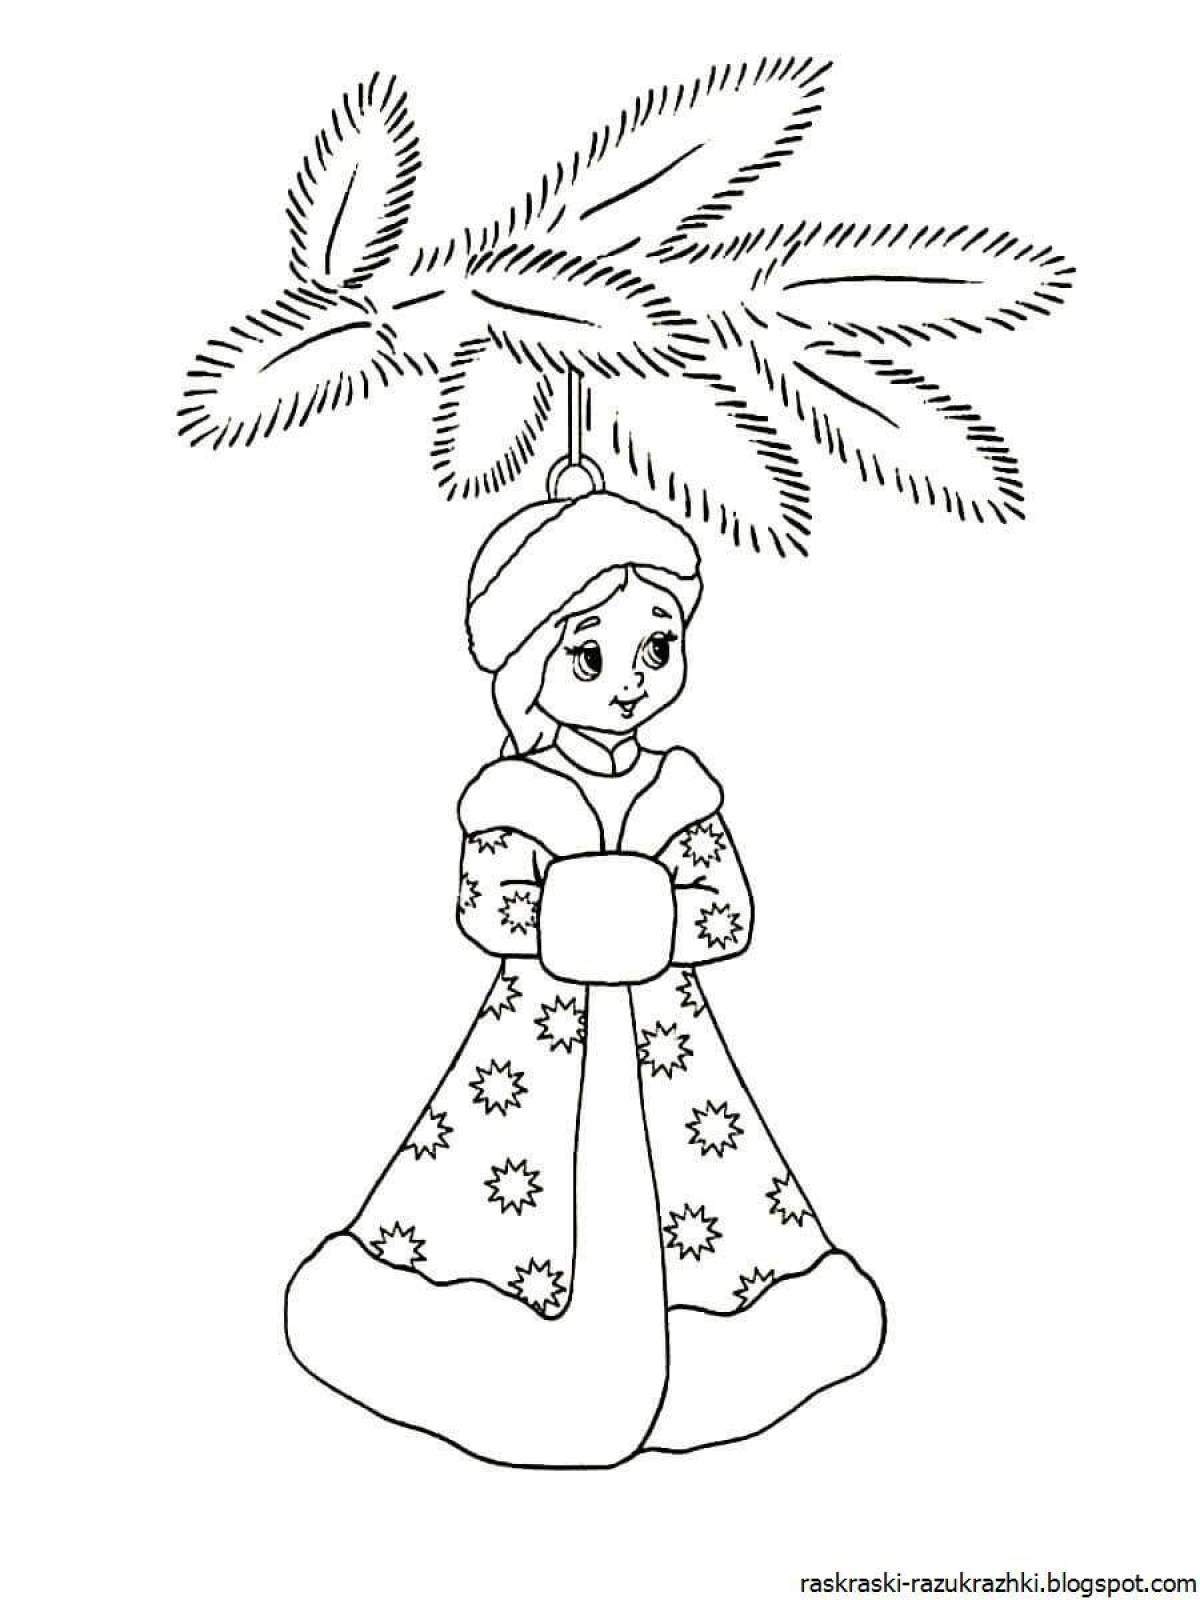 Joyful coloring of the snow maiden for children